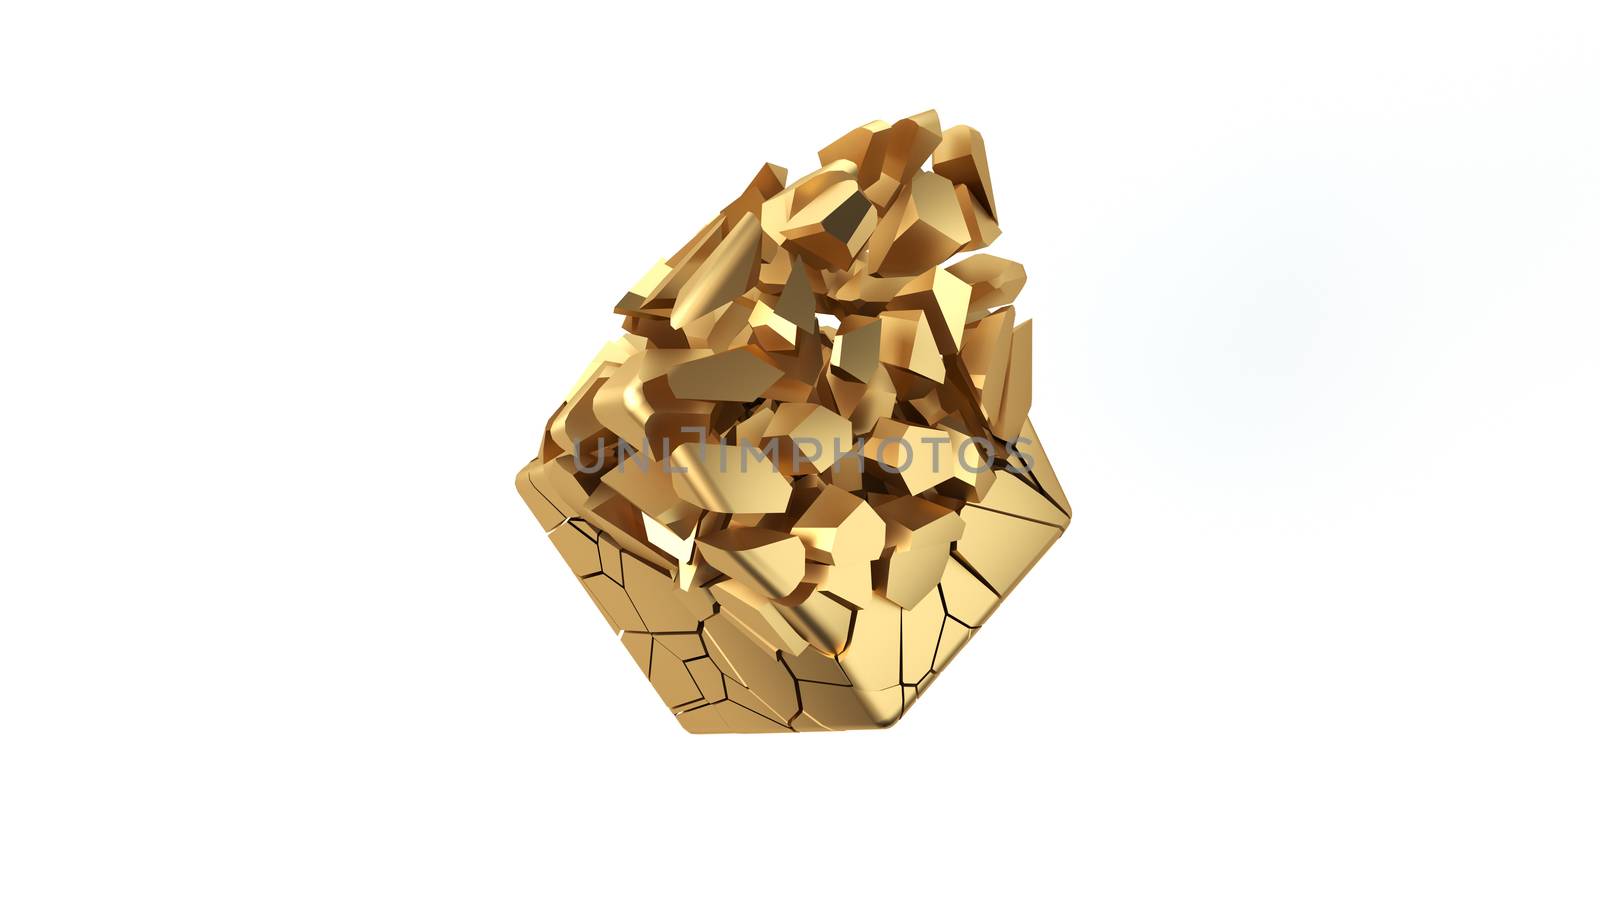 Abstract scattering golden shape. Gold cube breaks down to small pieces. 3D render illustration